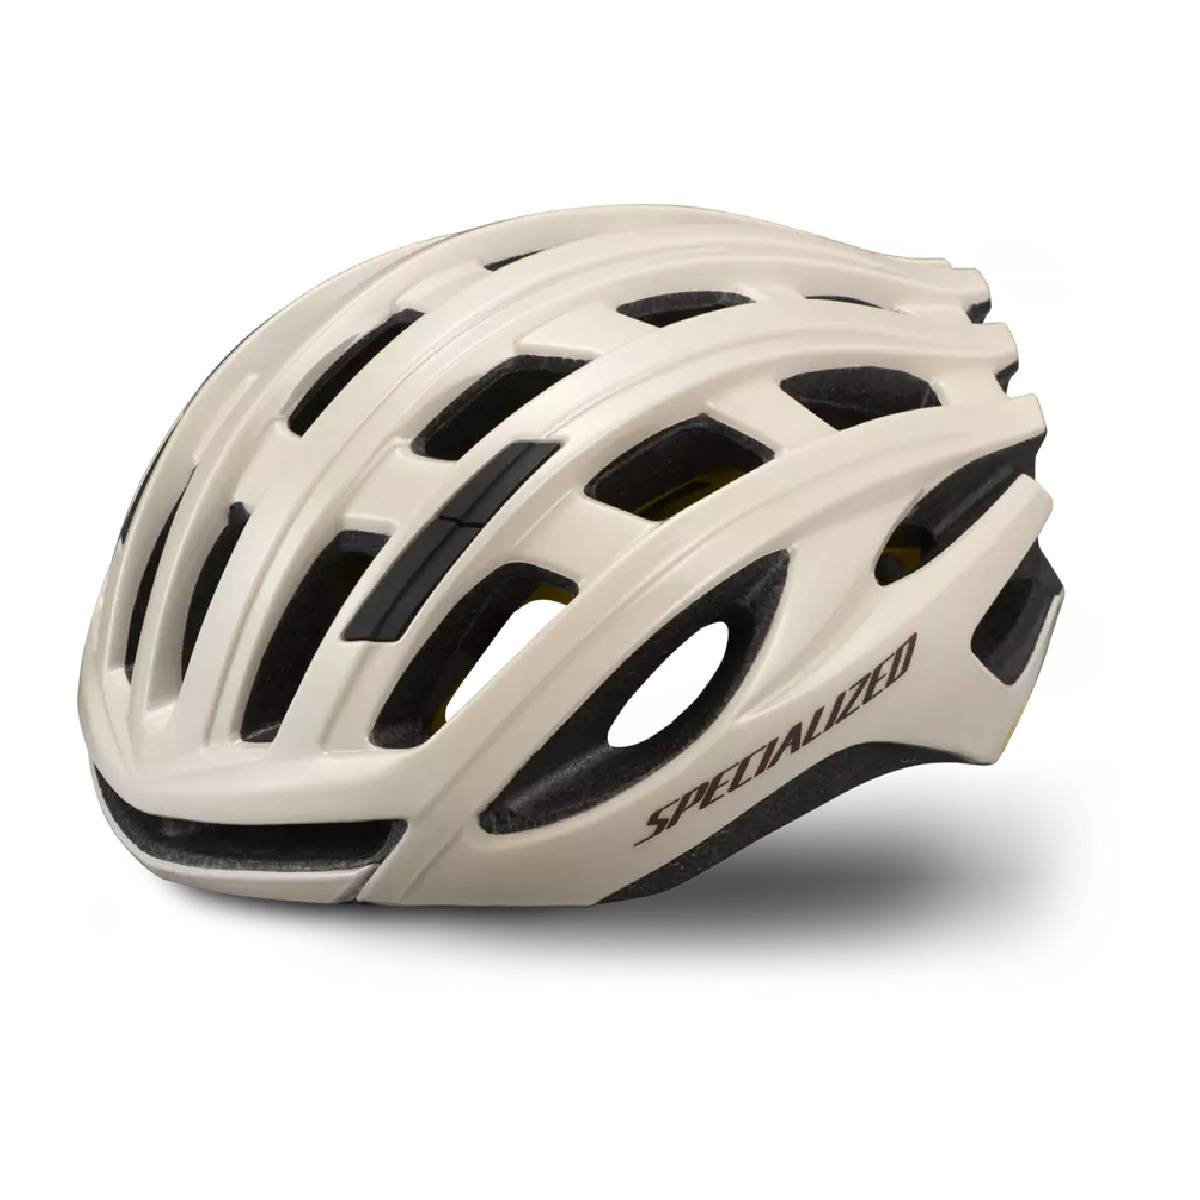 CASQUE SPECIALIZED PROPERO 3 SABLE SMALL